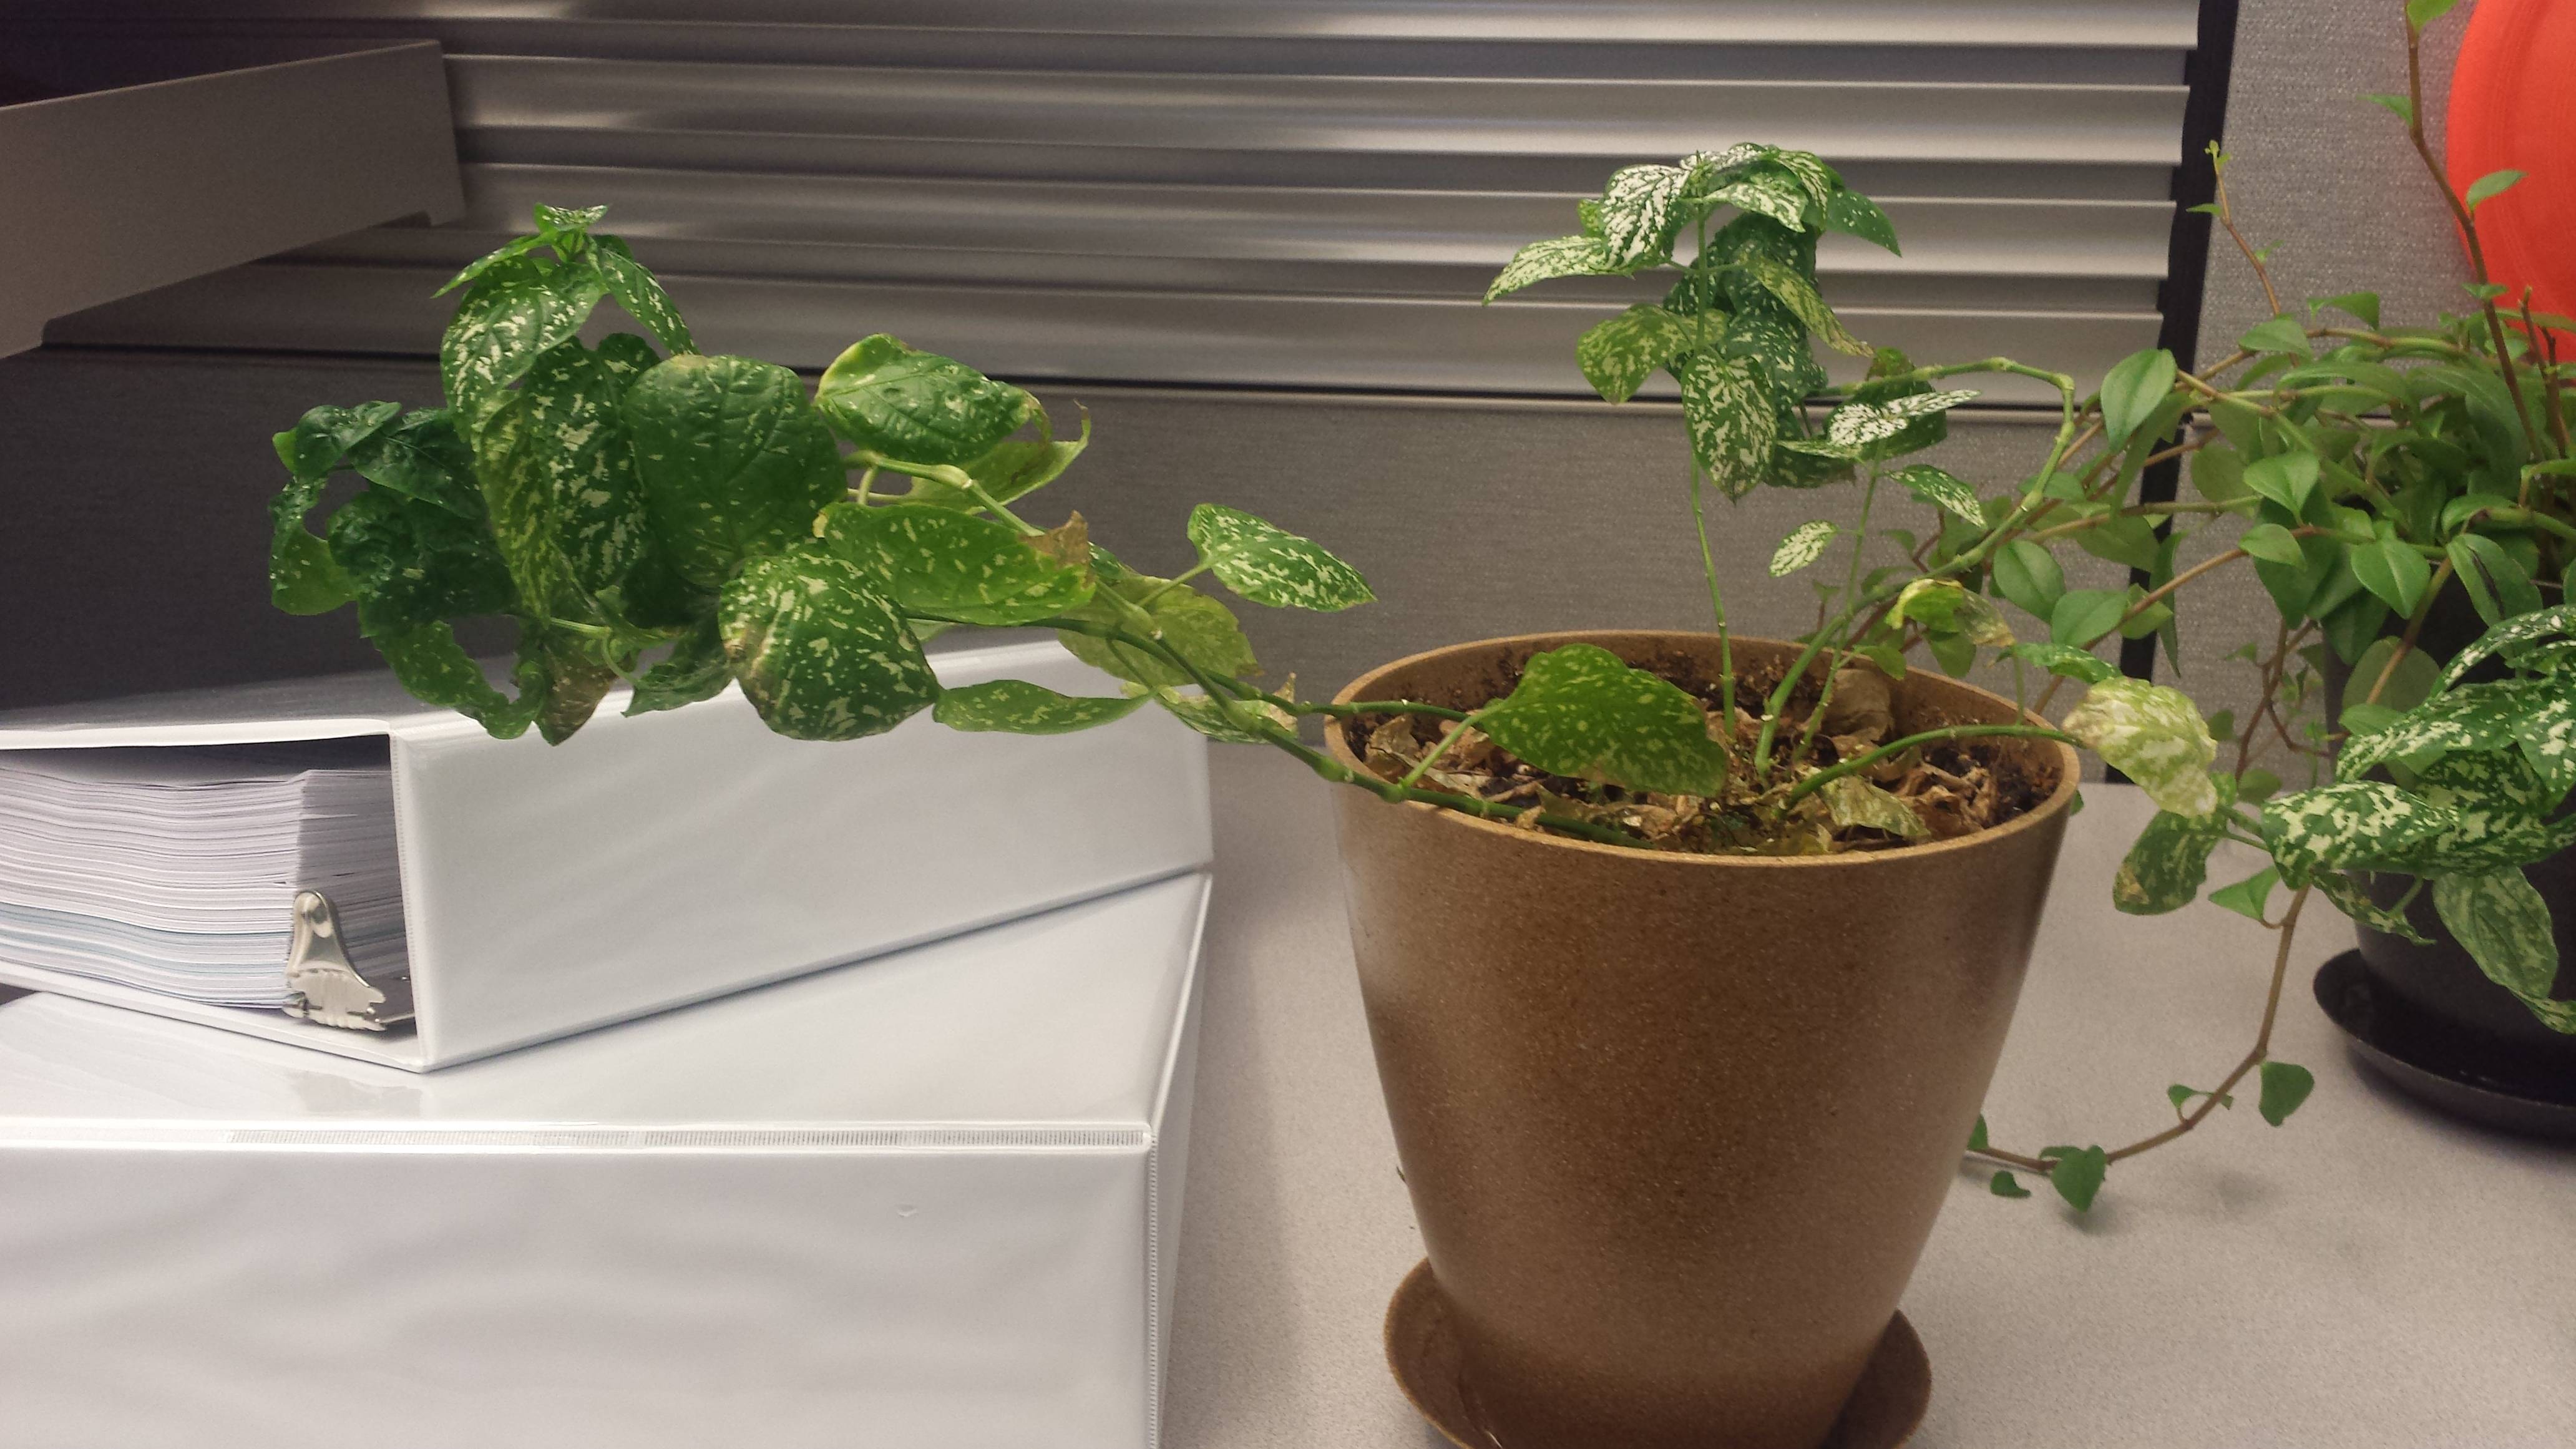 My office plant is growing sideways, I don't think it is healthy ...